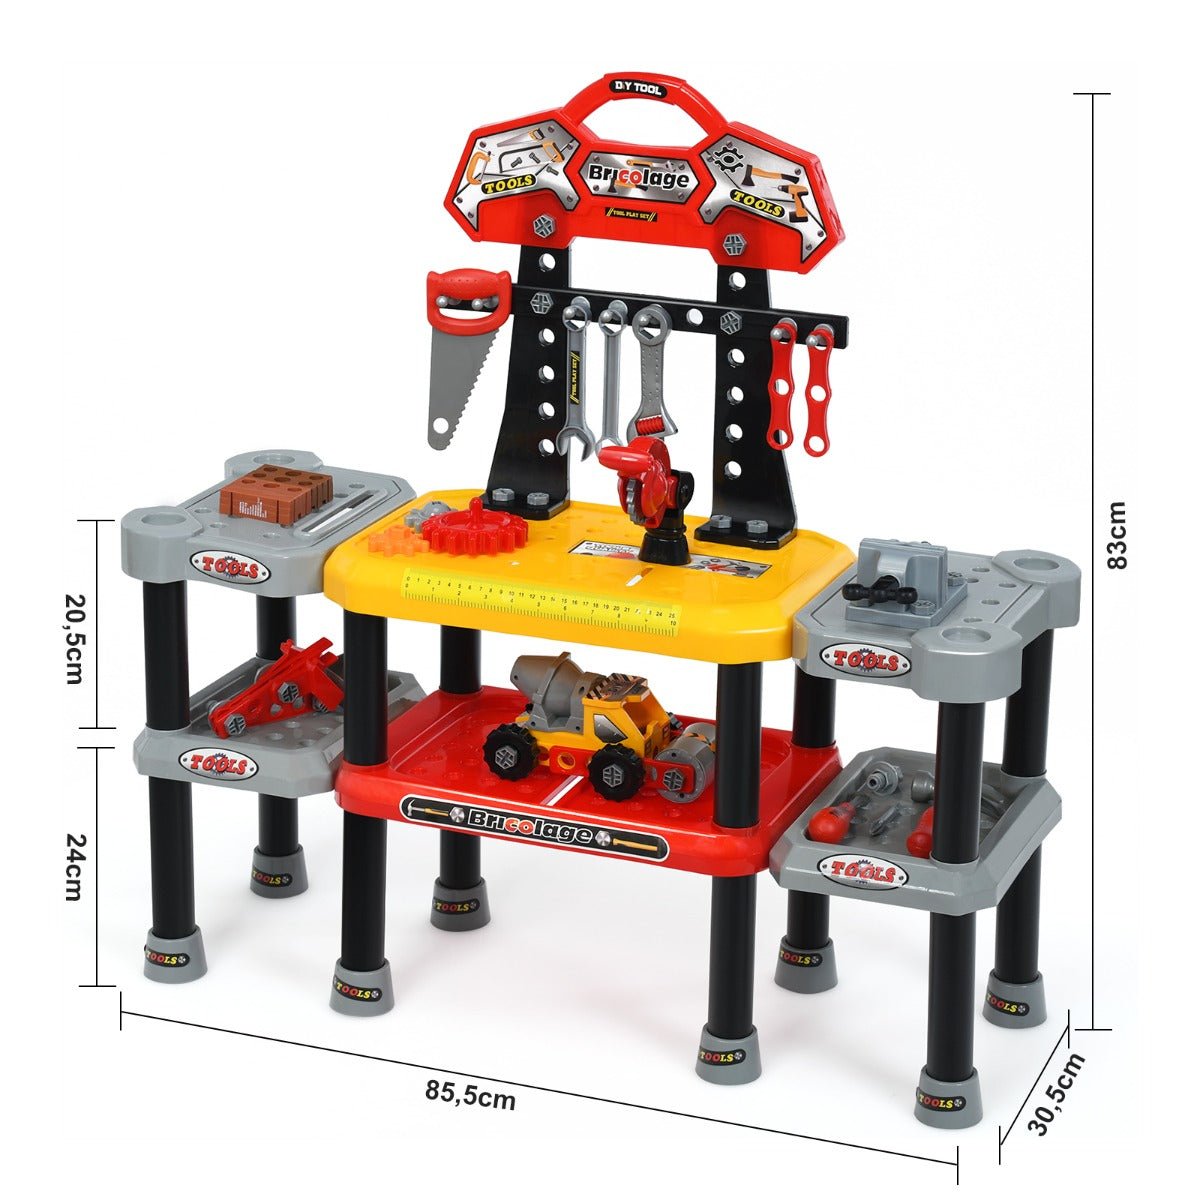 Empower Young Minds: 121 PCS Toy Tool Play Set with Double Tier